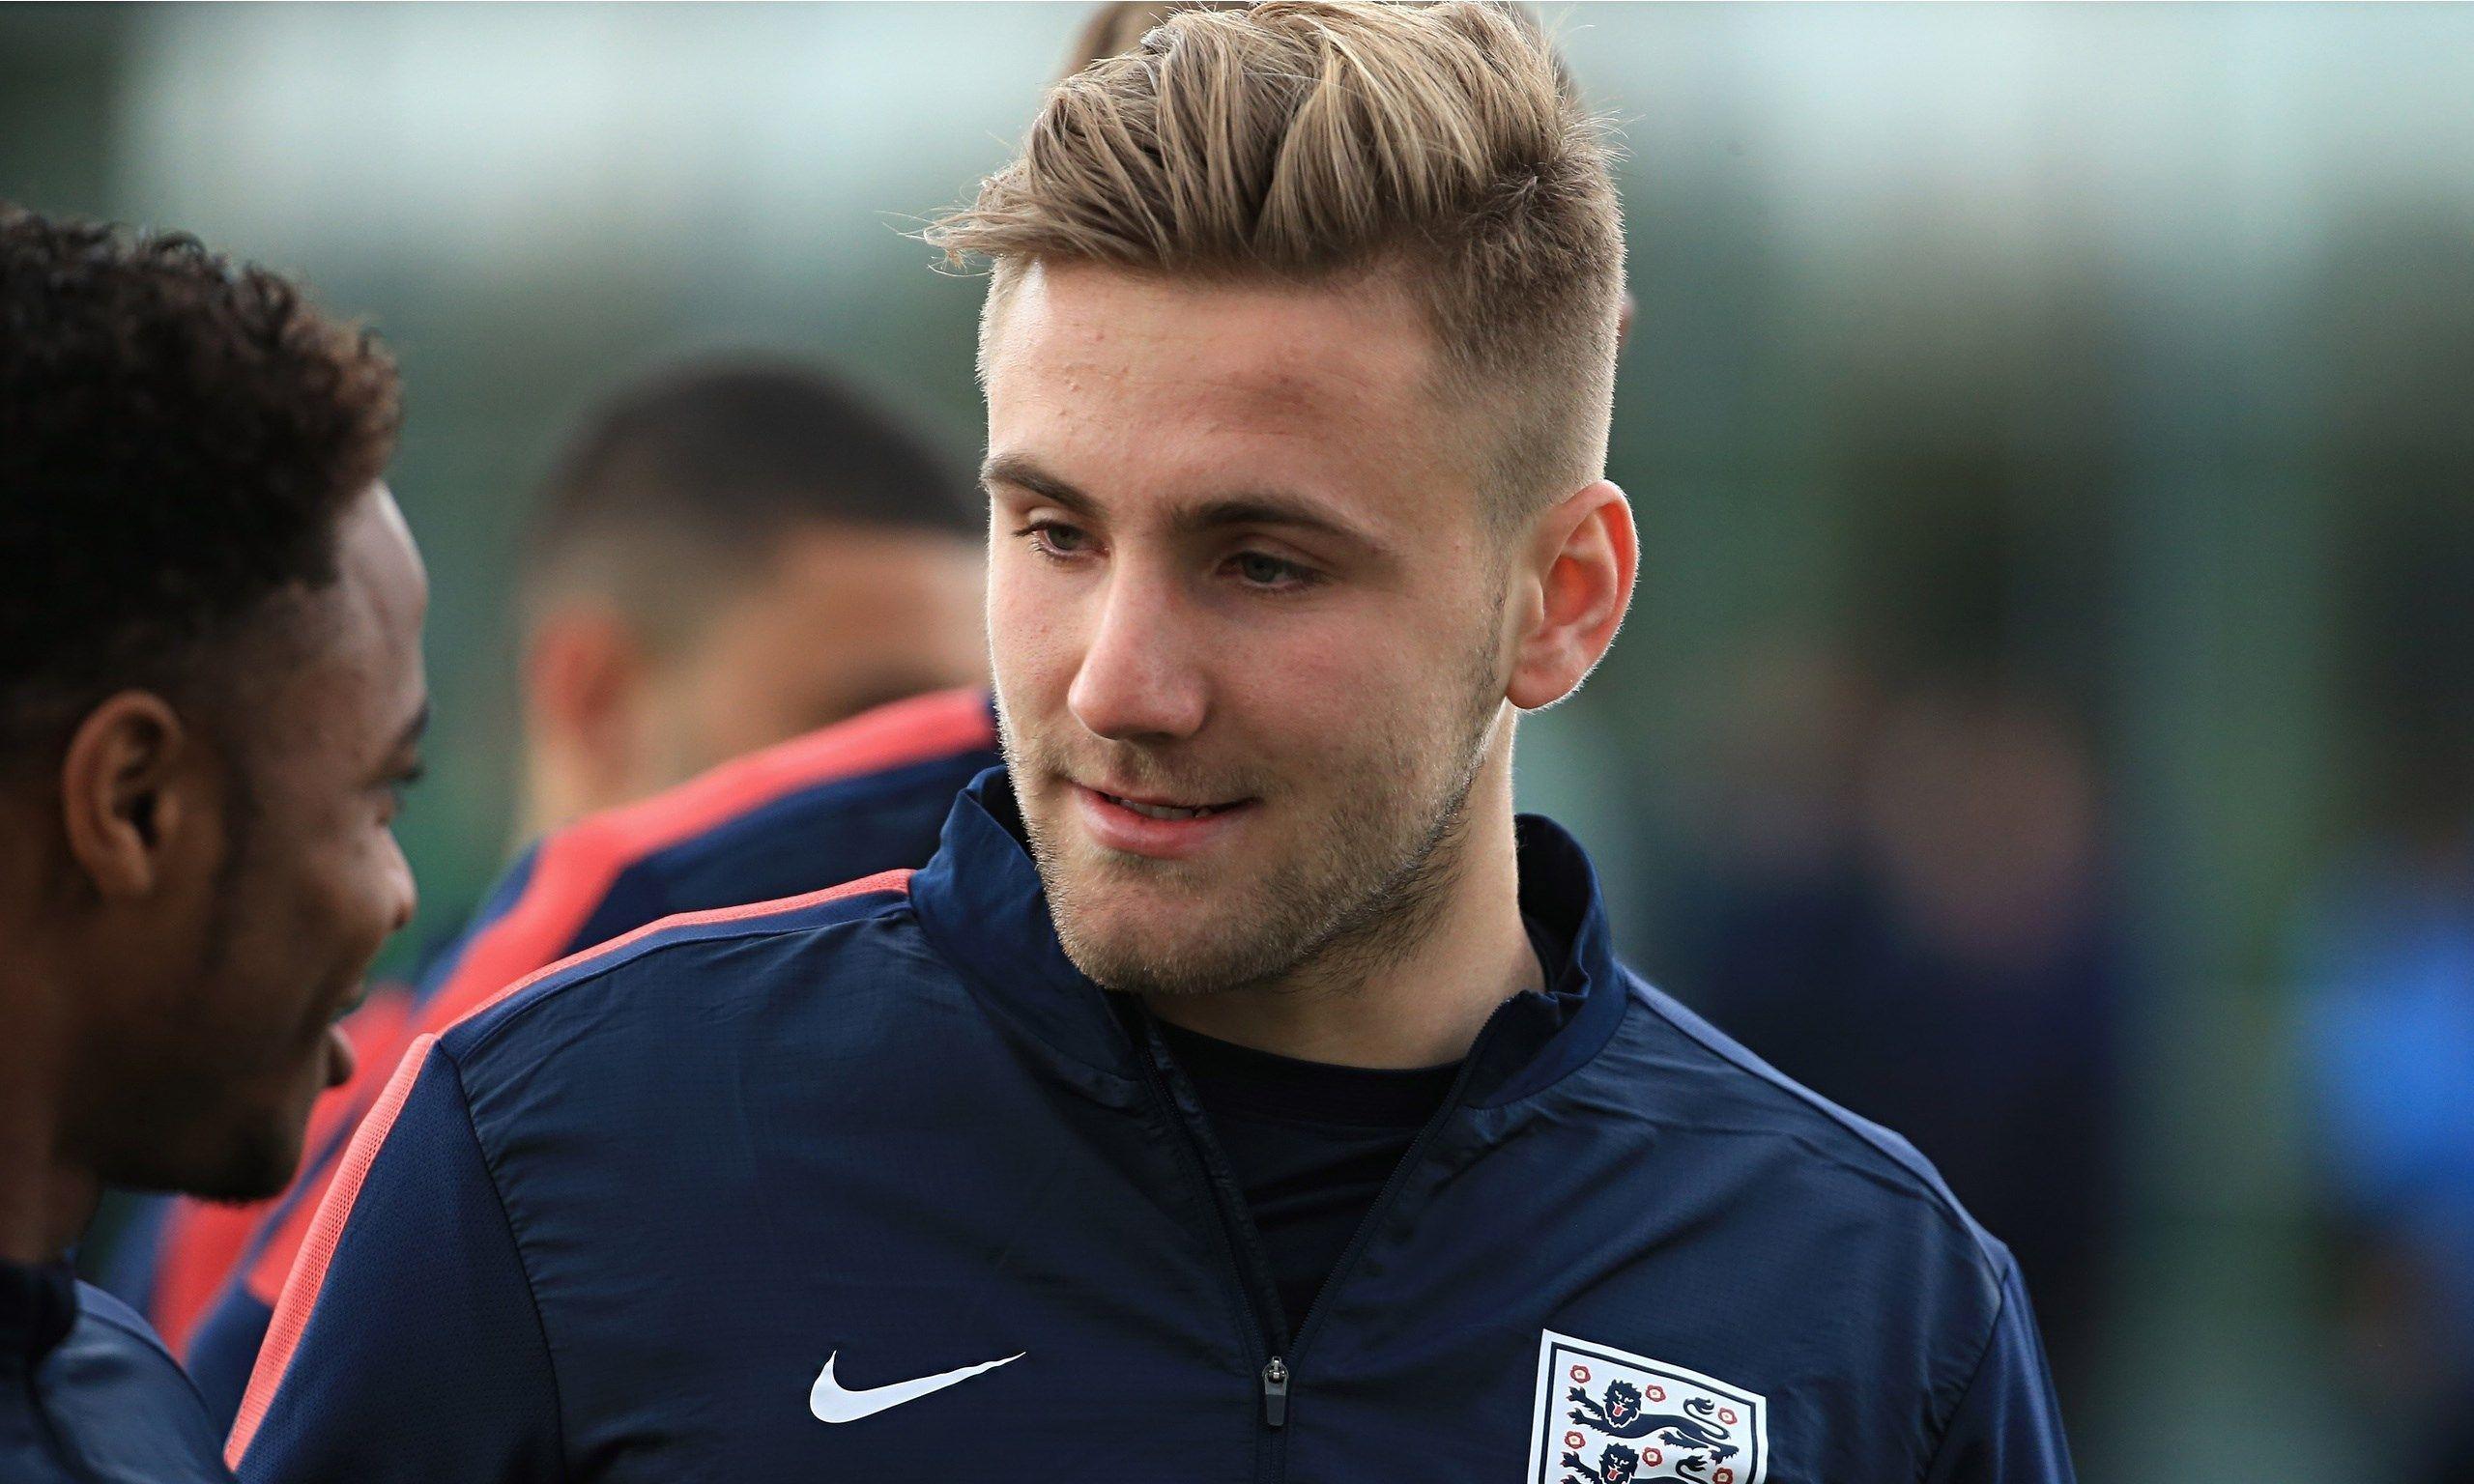 Luke Shaw. Known people people news and biographies